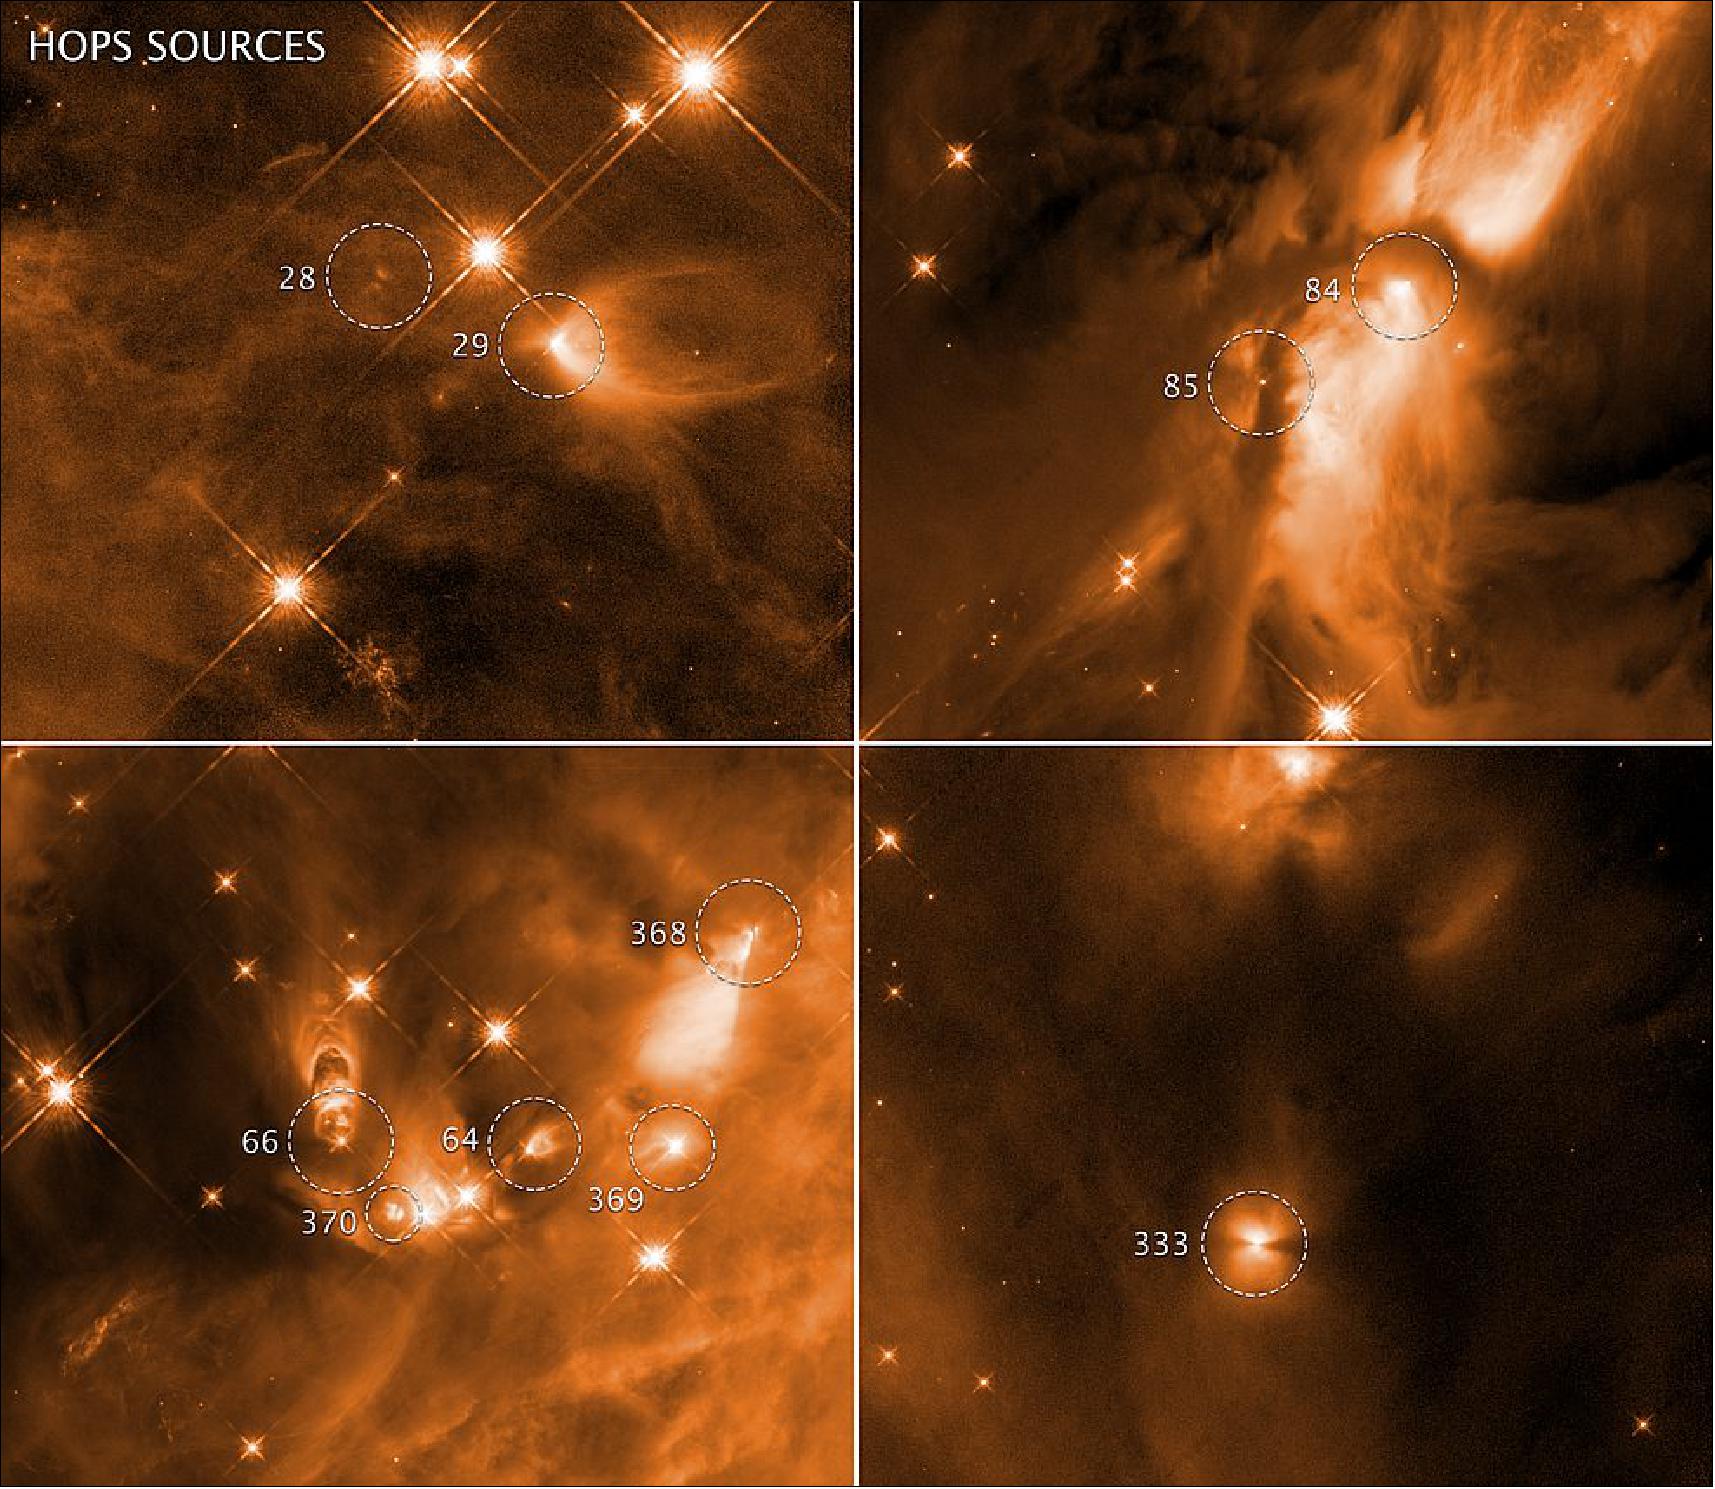 Figure 105: These four images taken by NASA's Hubble Space Telescope reveal the chaotic birth of stars in the Orion complex, the nearest major star-forming region to Earth. The snapshots show fledgling stars buried in dusty gaseous cocoons announcing their births by unleashing powerful winds and pairs of spinning, lawn-sprinkler-style jets shooting off in opposite directions. Near-infrared light pierces the dusty region to unveil details of the birthing process. The stellar outflows are carving out cavities within the hydrogen gas cloud. This relatively brief birthing stage lasts about 500,000 years. Although the stars themselves are shrouded in dust, they emit powerful radiation, which strikes the cavity walls and scatters off dust grains, illuminating in infrared light the gaps in the gaseous envelopes. Astronomers found that the cavities in the surrounding gas cloud sculpted by a forming star's outflow did not grow regularly as they matured, as theories propose. The protostars were photographed in near-infrared light by Hubble's Wide Field Camera 3. The images were taken Nov. 14, 2009, and Jan. 25, Feb. 11, and Aug. 11, 2010 [image credits: NASA, ESA, STScI, N. Habel and S. T. Megeath (University of Toledo)]